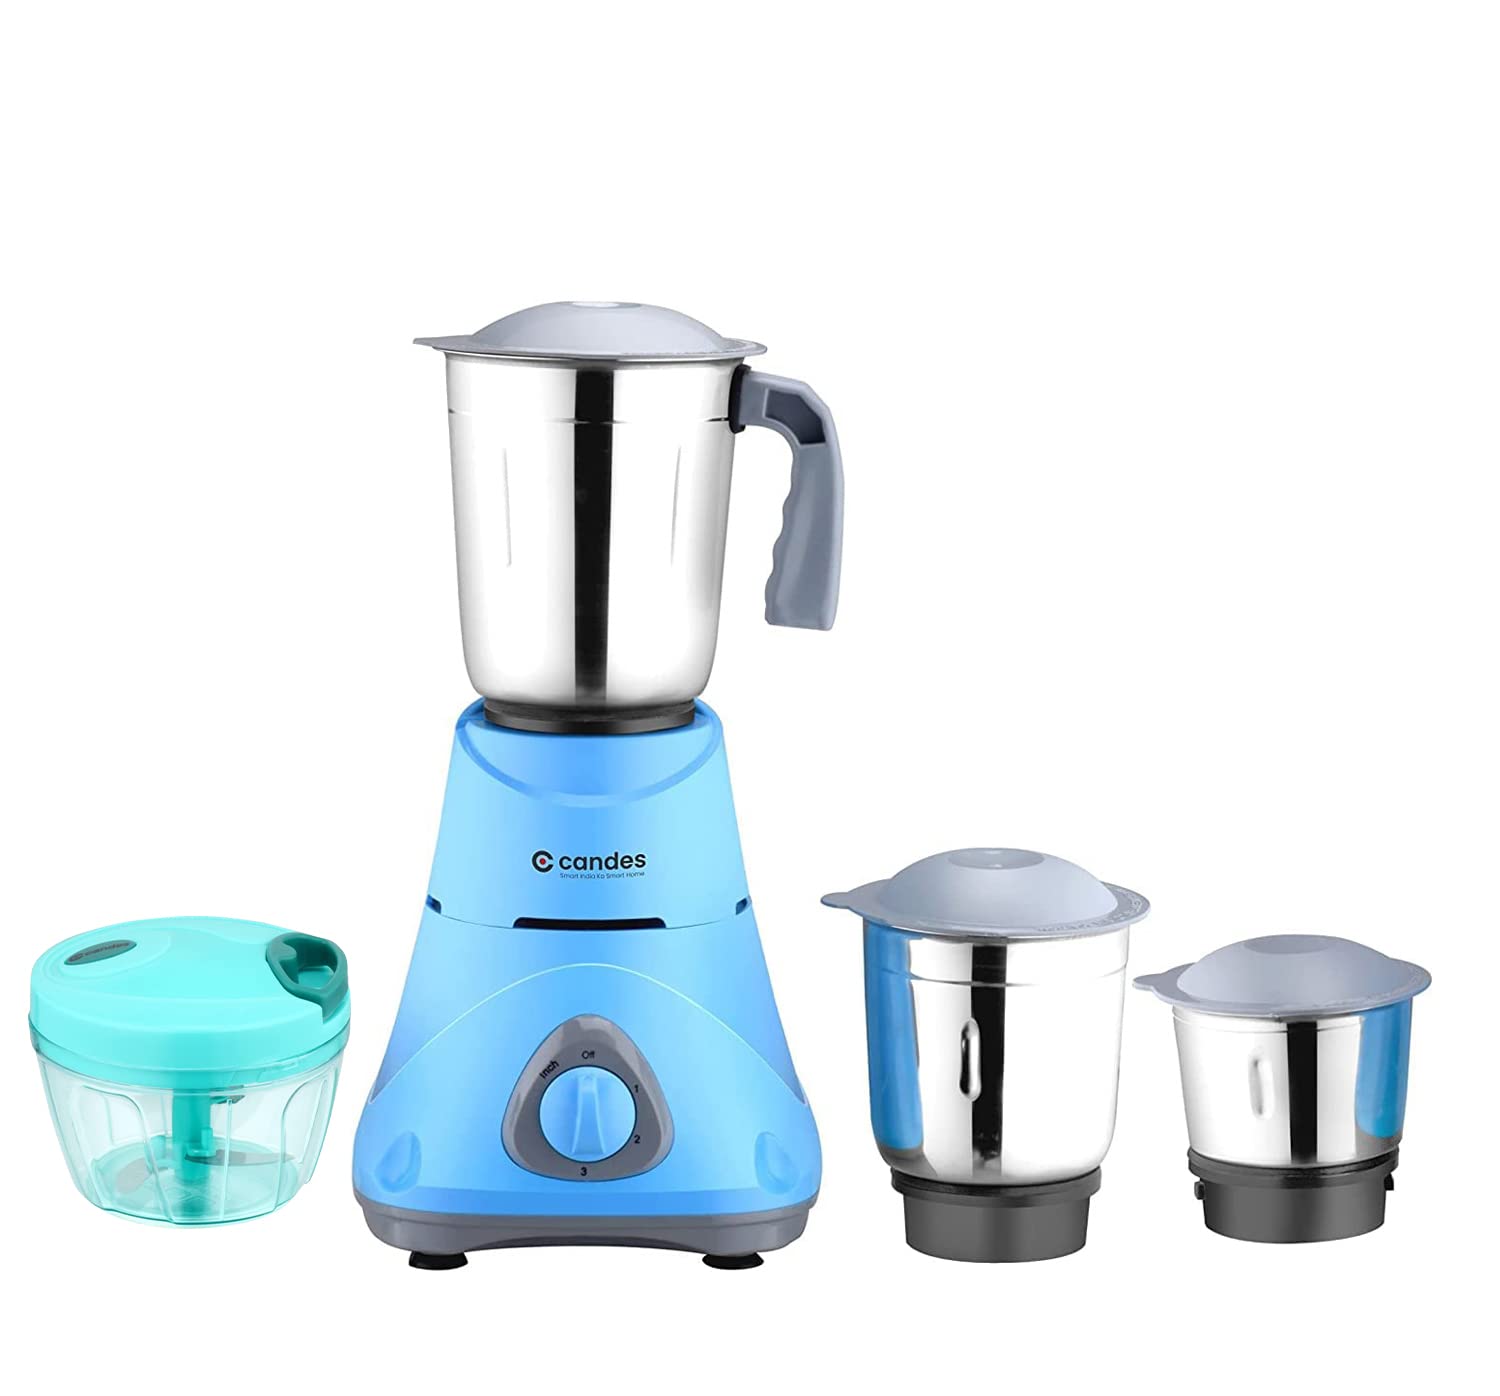 Candes Bolt 550-Watt Mixer Grinder with 3 Jars, Powerful Motor and 2 Year Warranty on Motor, (Blue Grey) + Quick Hand Vegetables & Fruit Chopper Green (Super Combo)